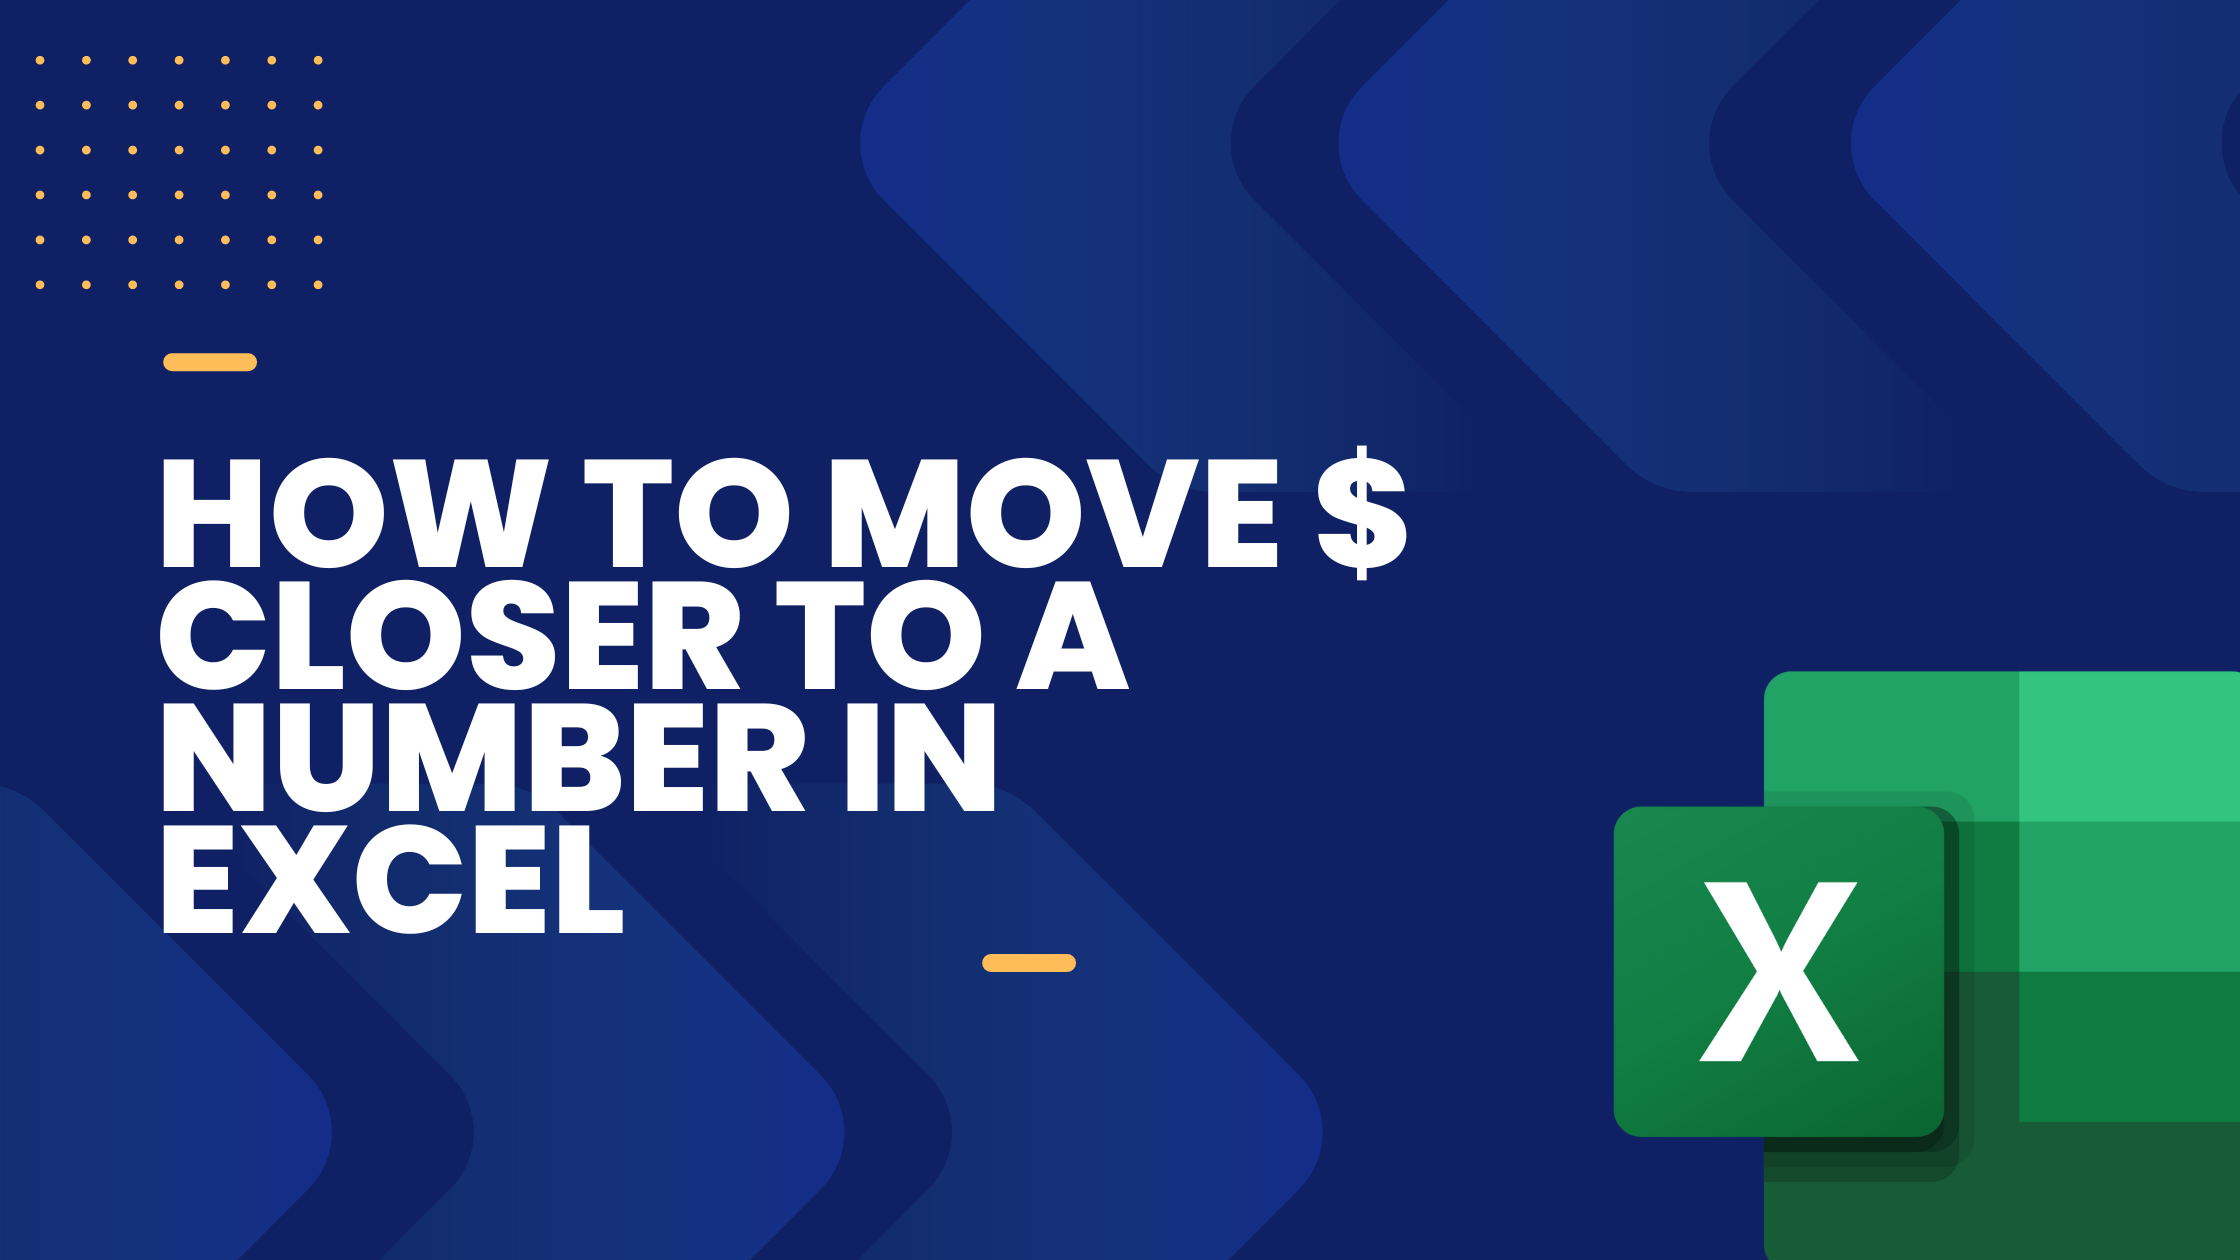 How to move $ closer to a number in Excel - Excel Wizard